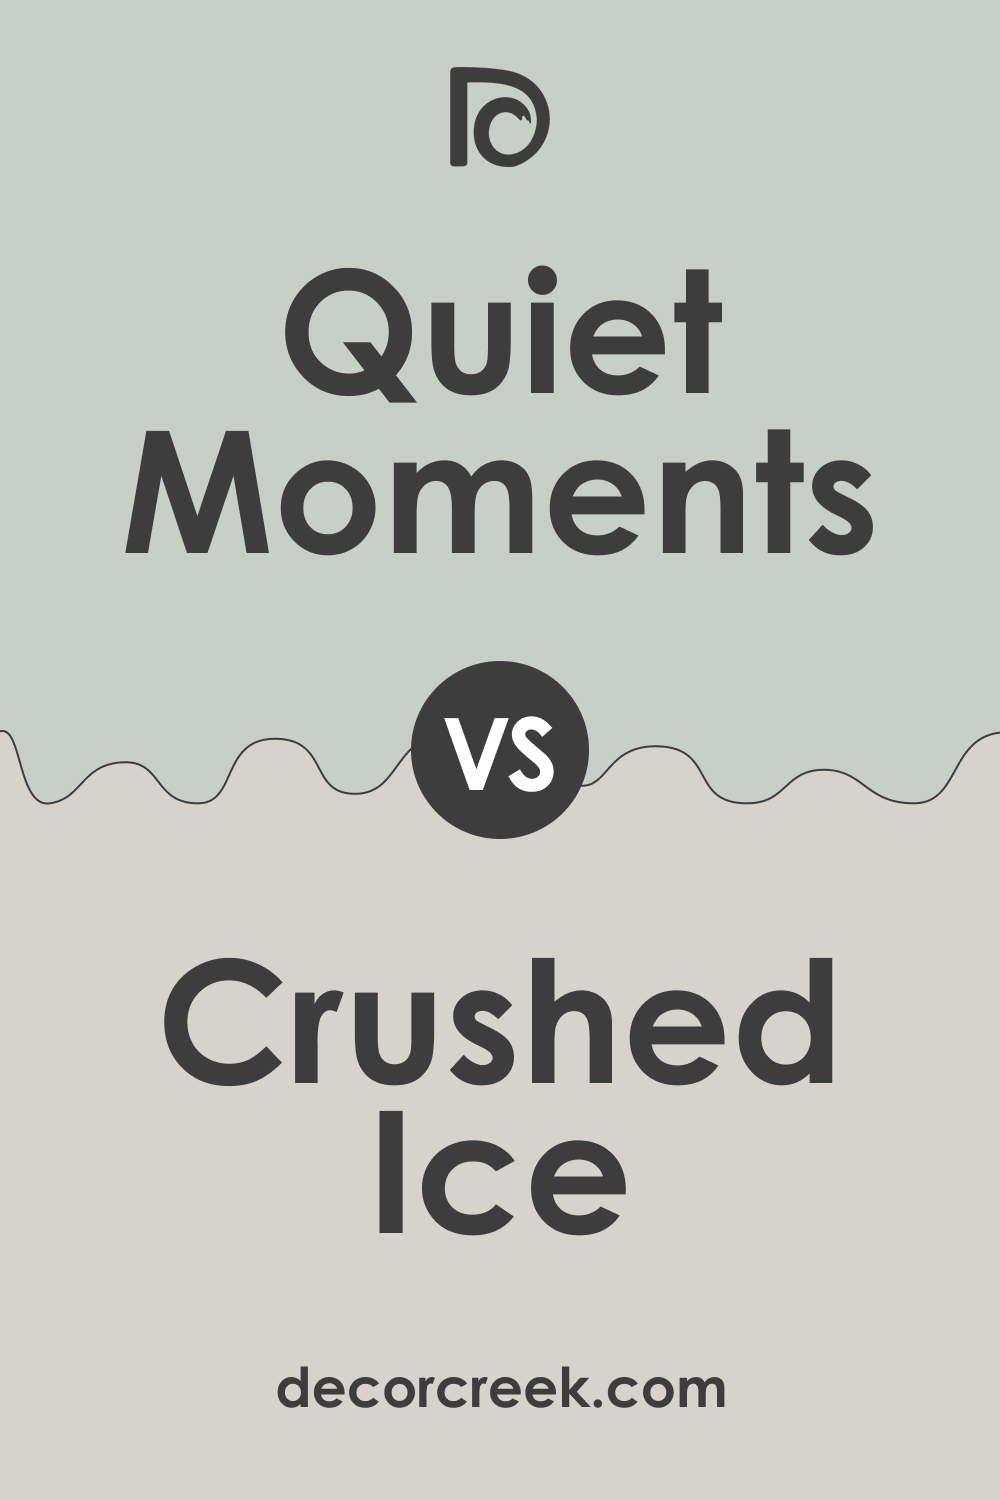 Quiet Moments vs Crushed Ice